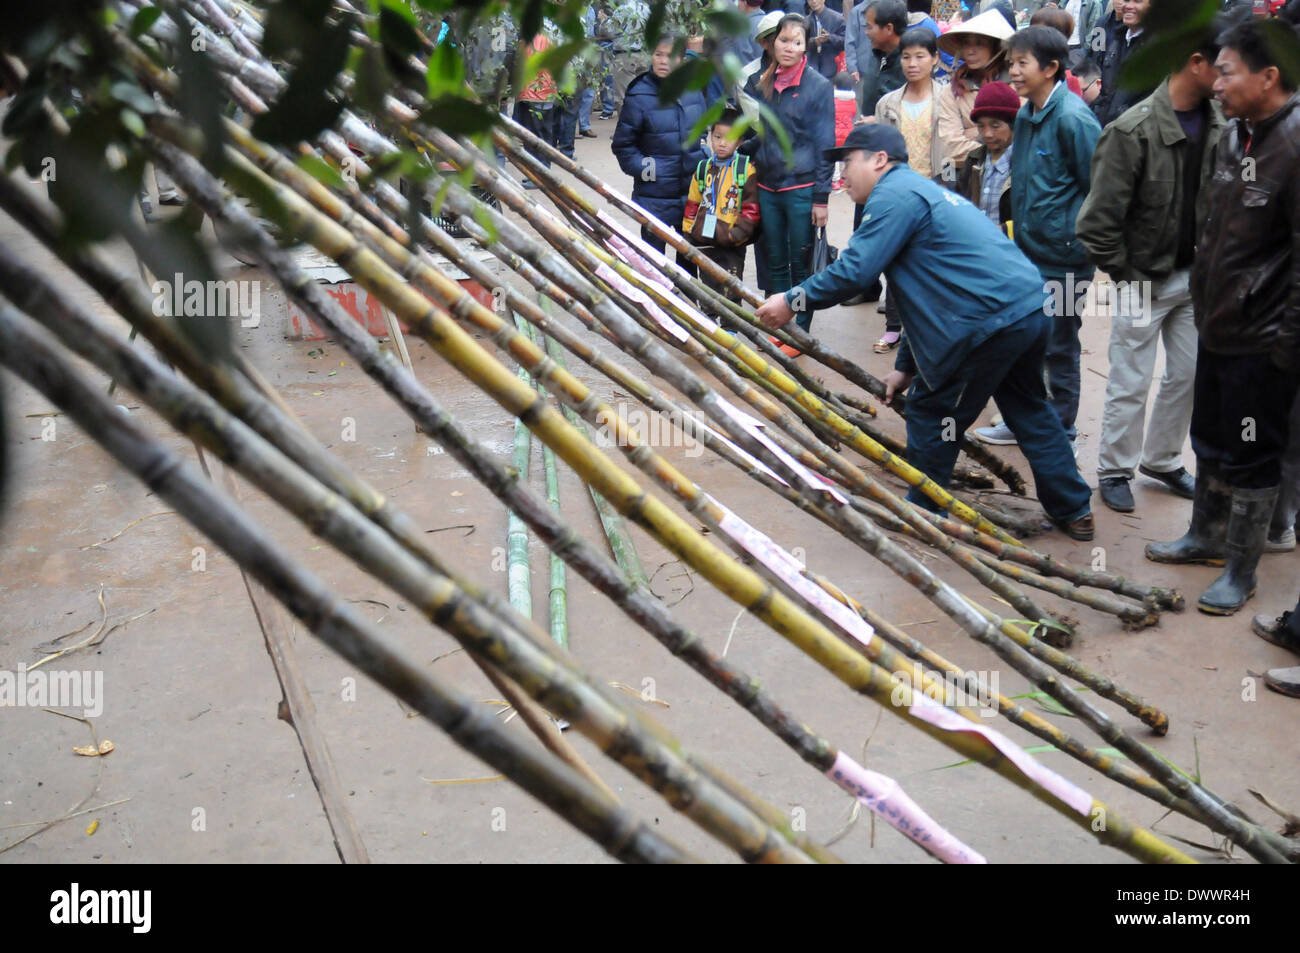 Shangsi, China's Guangxi Zhuang Autonomous Region. 13th Mar, 2013. Local residents view the sugarcanes at a sugarcane competition held in Hualan Township of Shangsi County, southwest China's Guangxi Zhuang Autonomous Region, March 13, 2013. © Liang Fuying/Xinhua/Alamy Live News Stock Photo